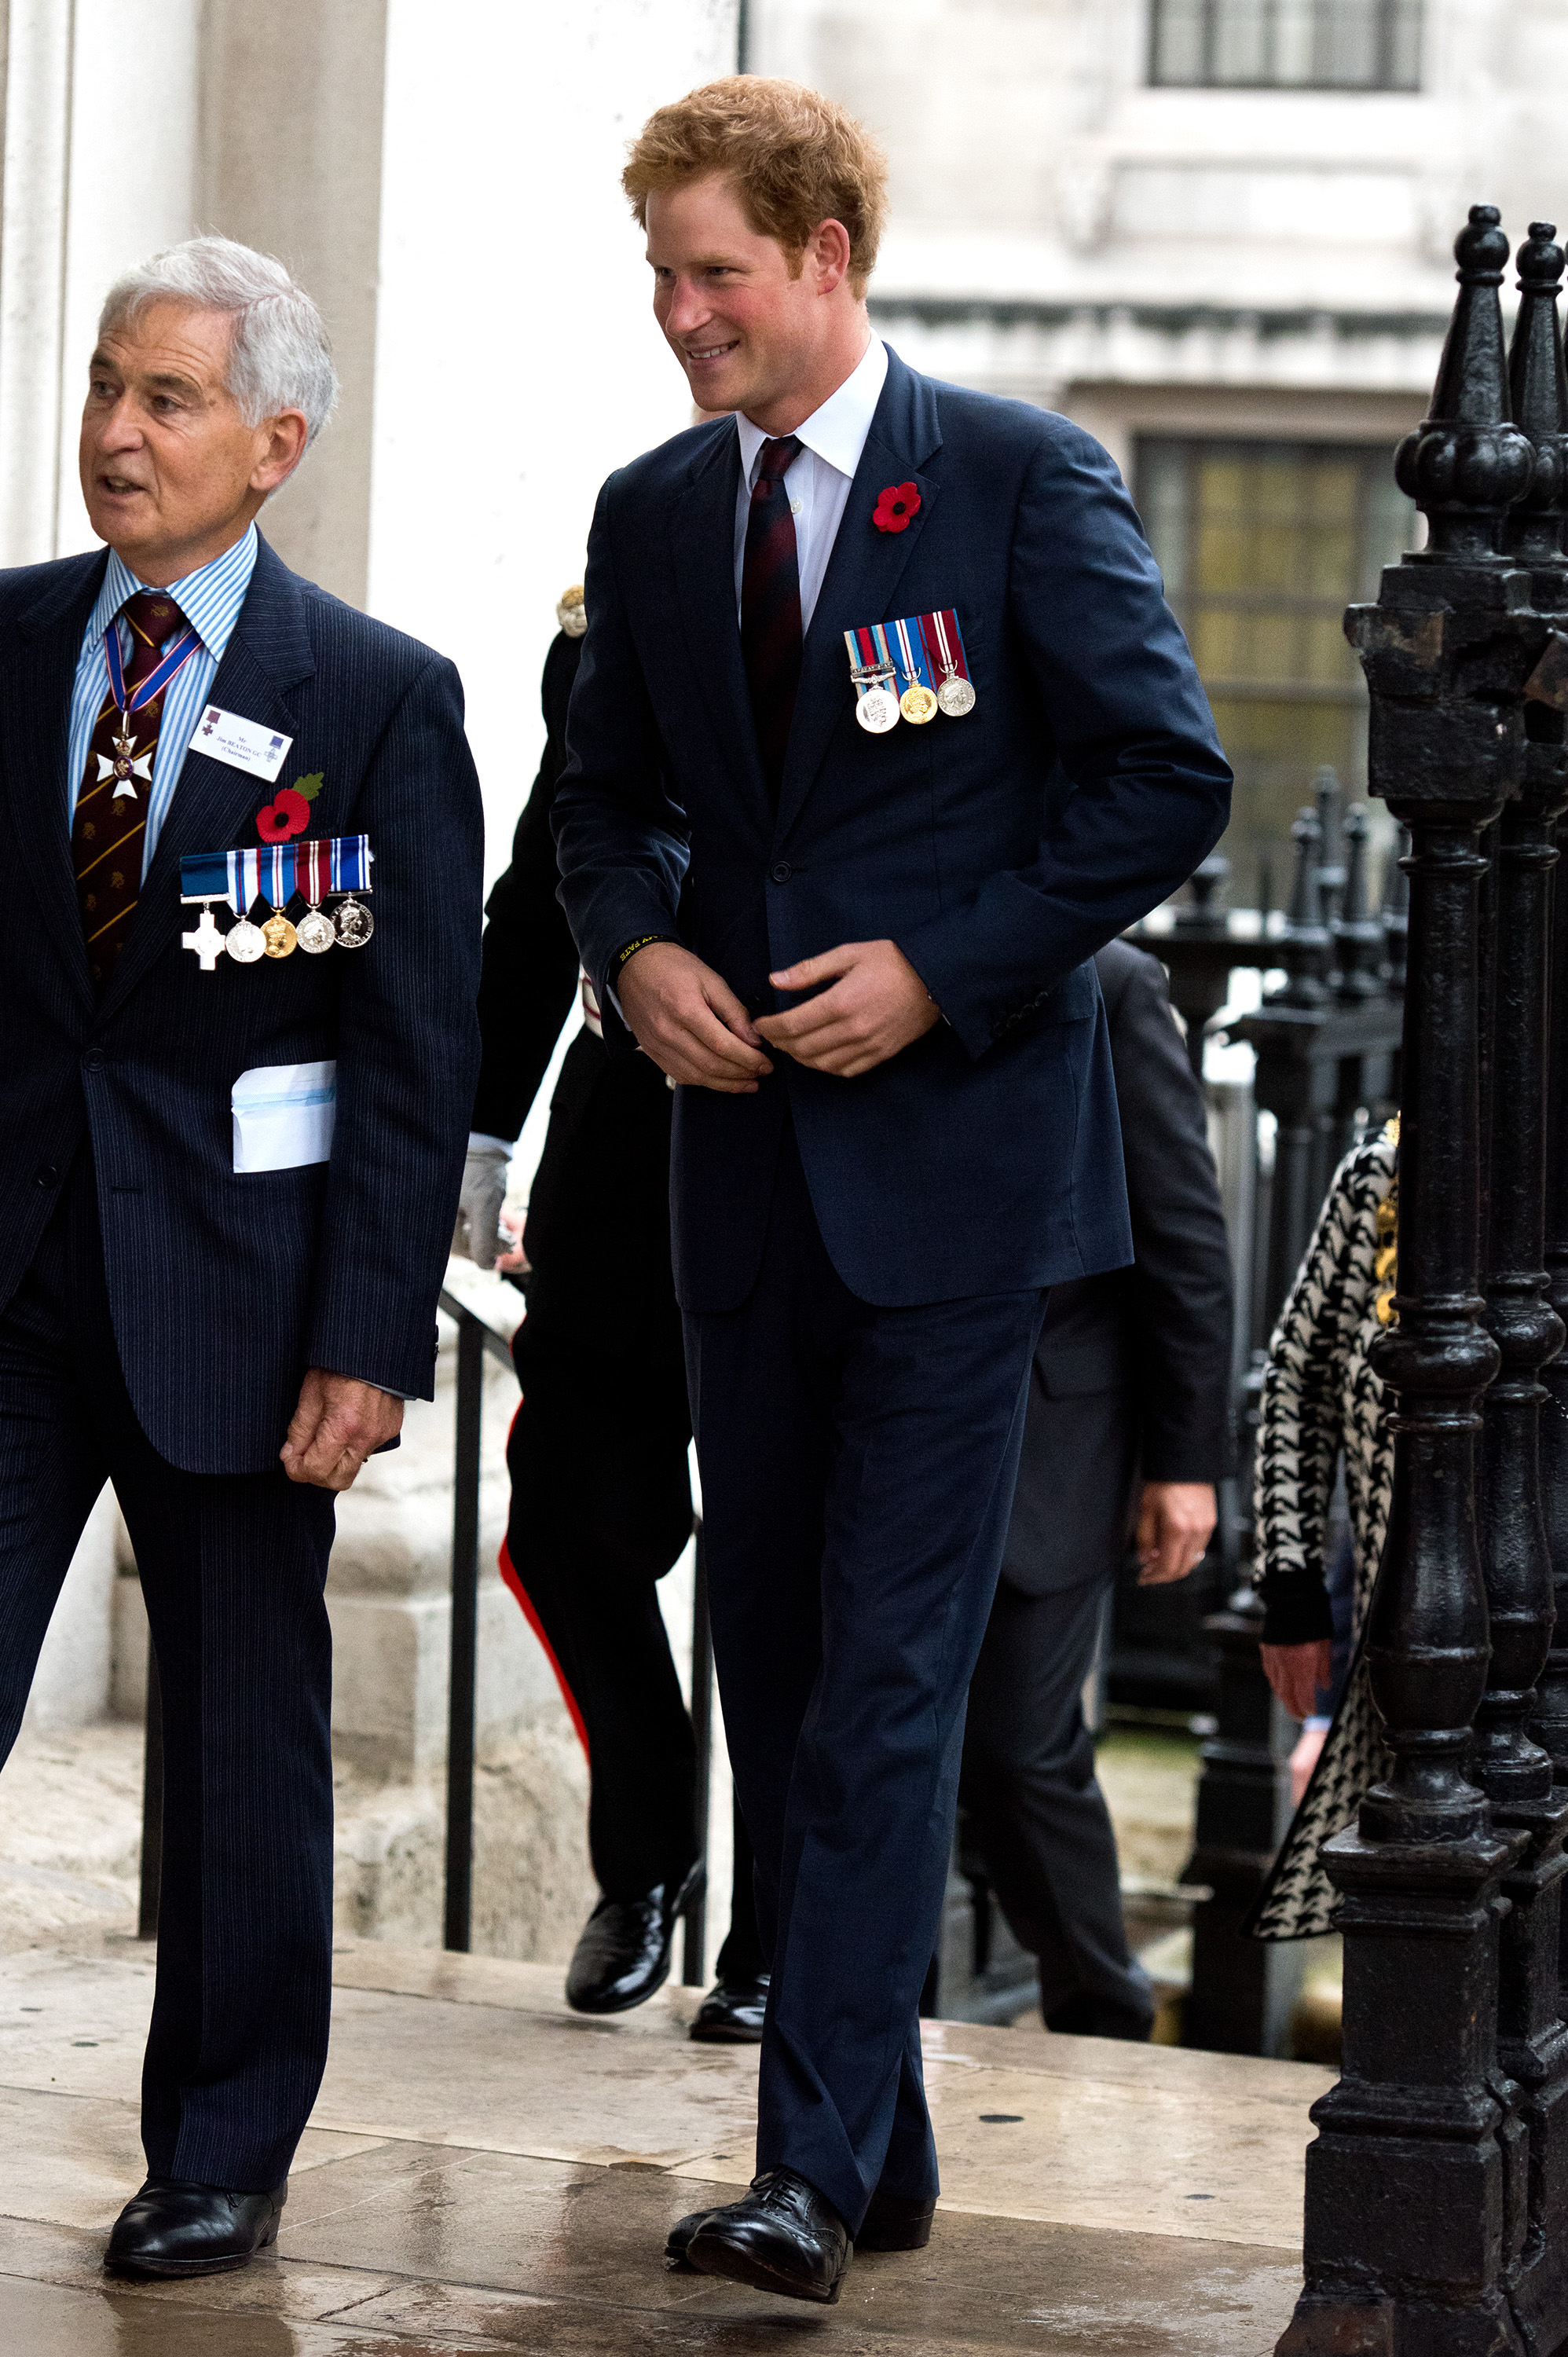 Prince Harry Attends The Service Of Remembrance And Re-Dedication For Members Of The Victoria Cross And George Cross Association